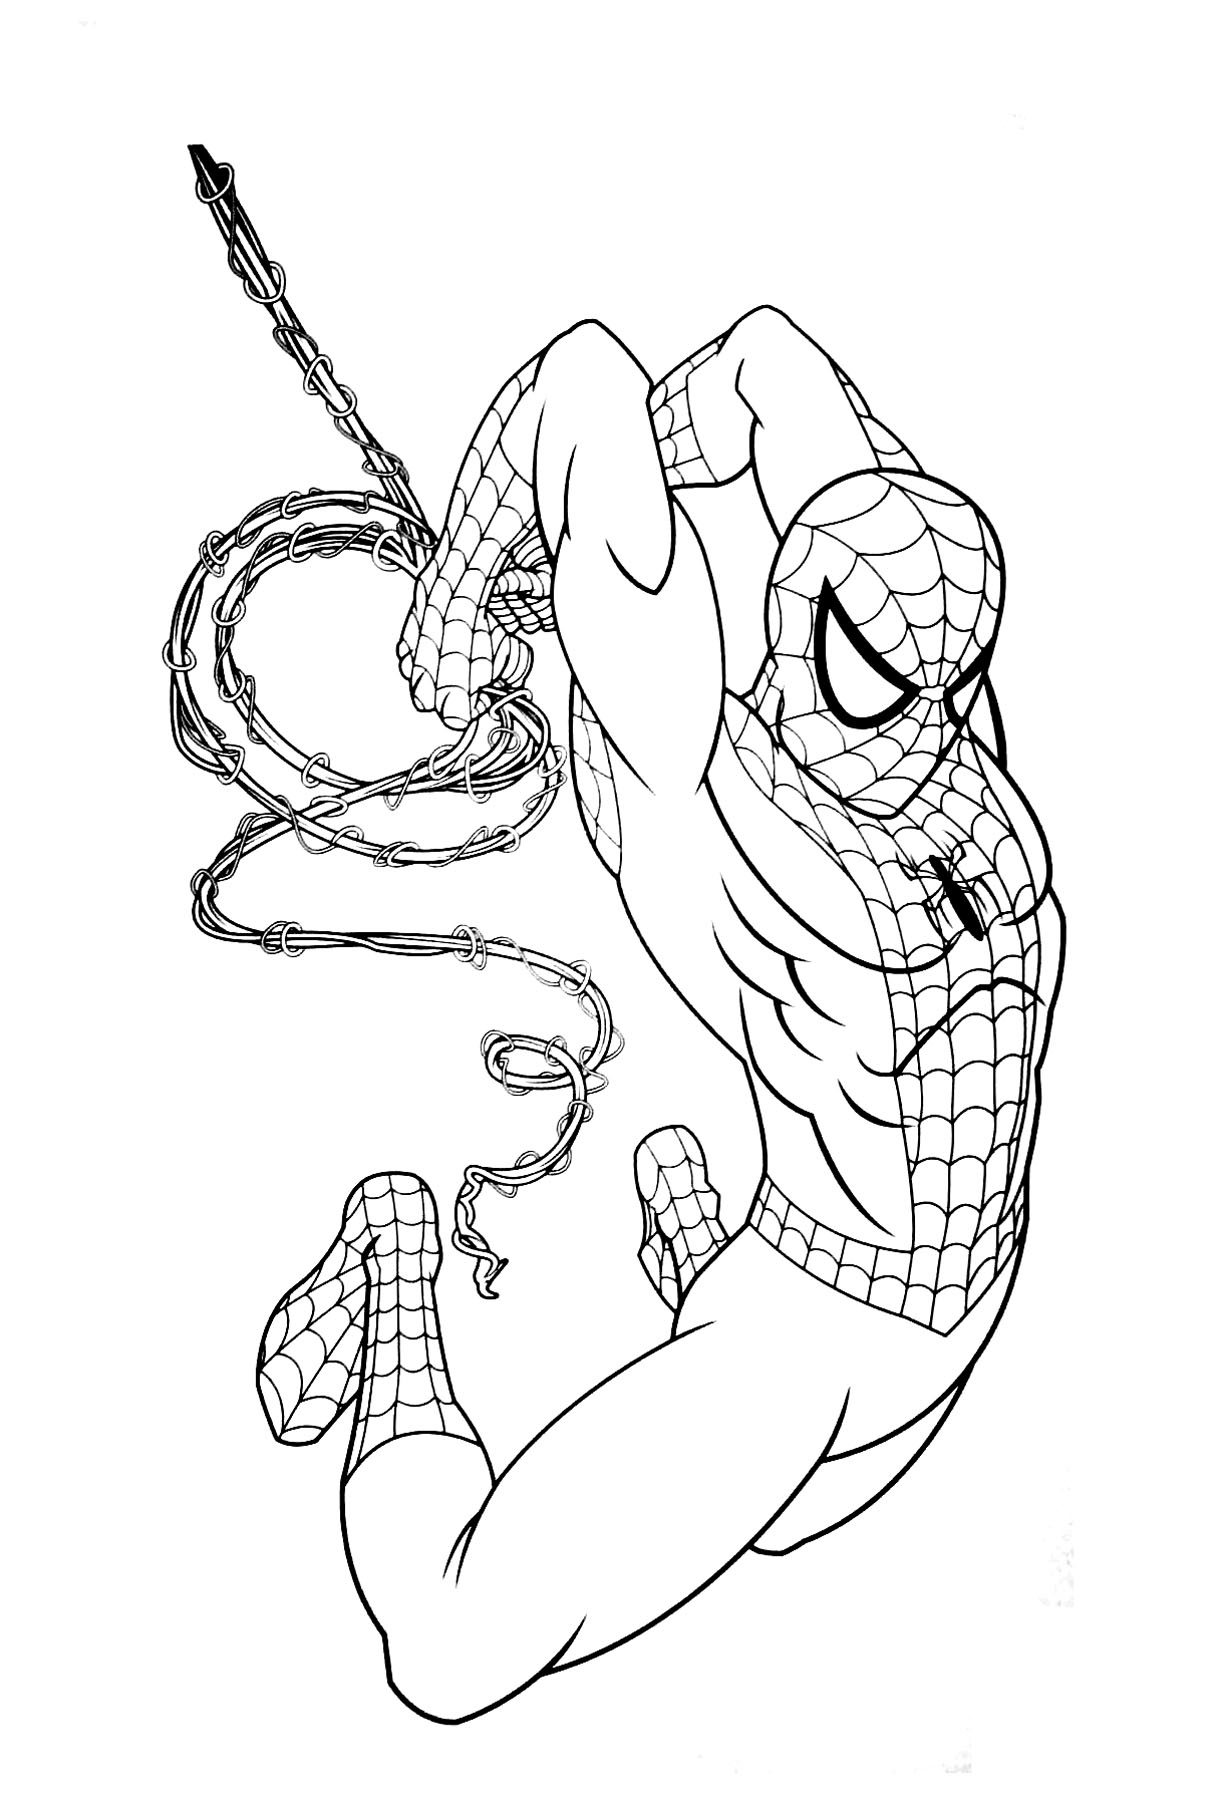 Spiderman coloring pages for kids Spiderman Kids Coloring Pages